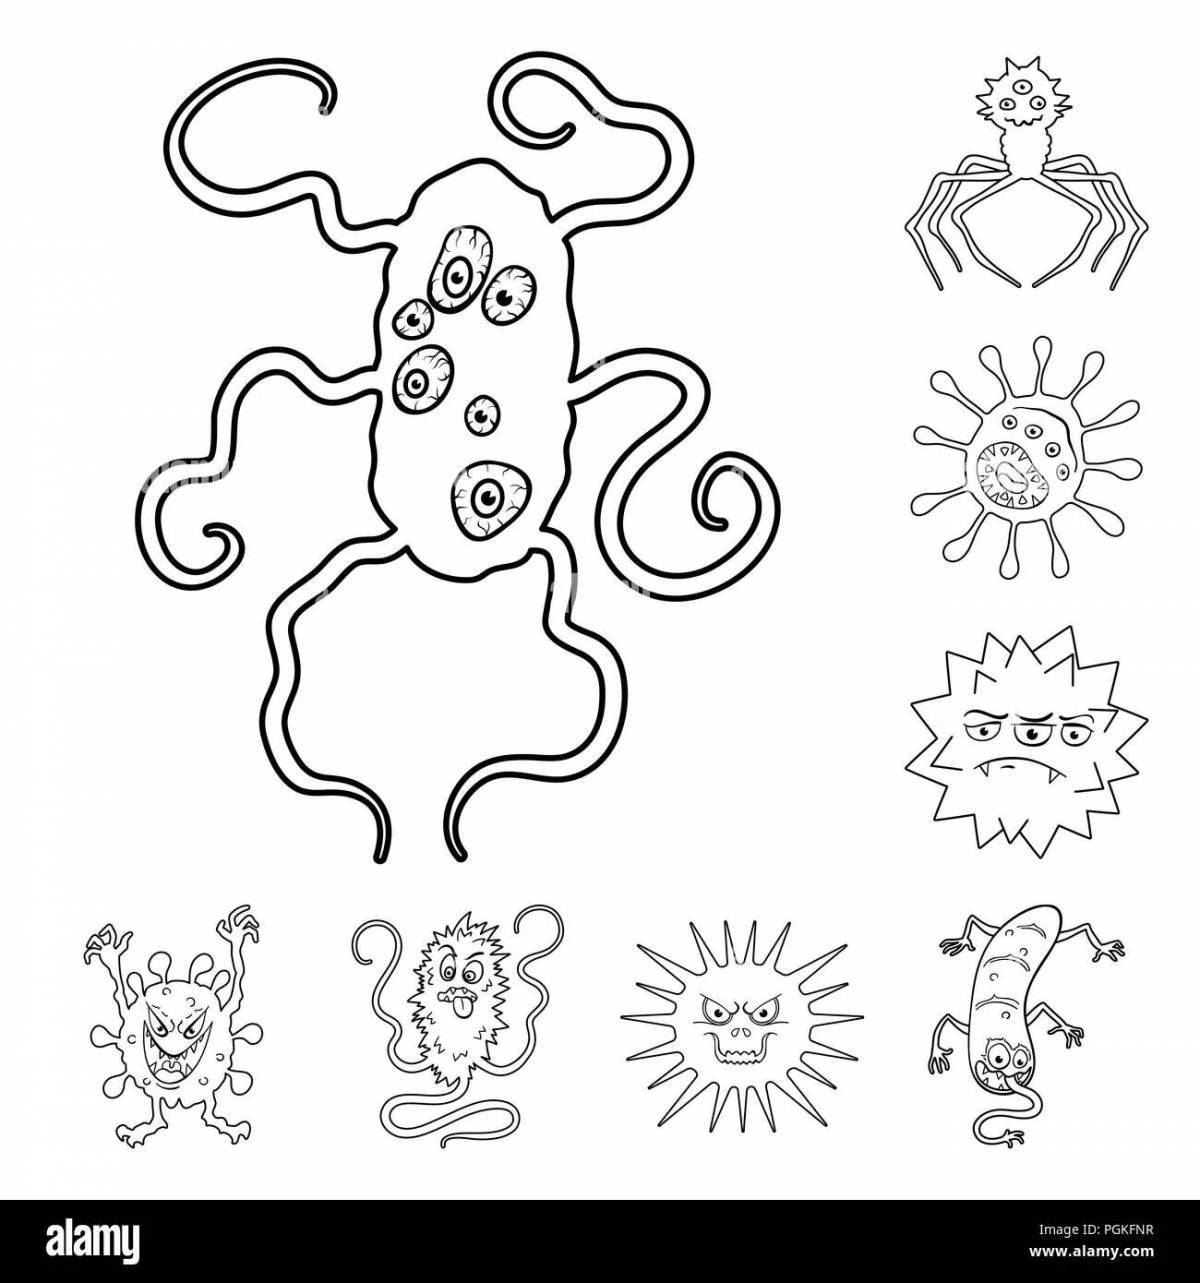 Coloring page amazing microbes and bacteria